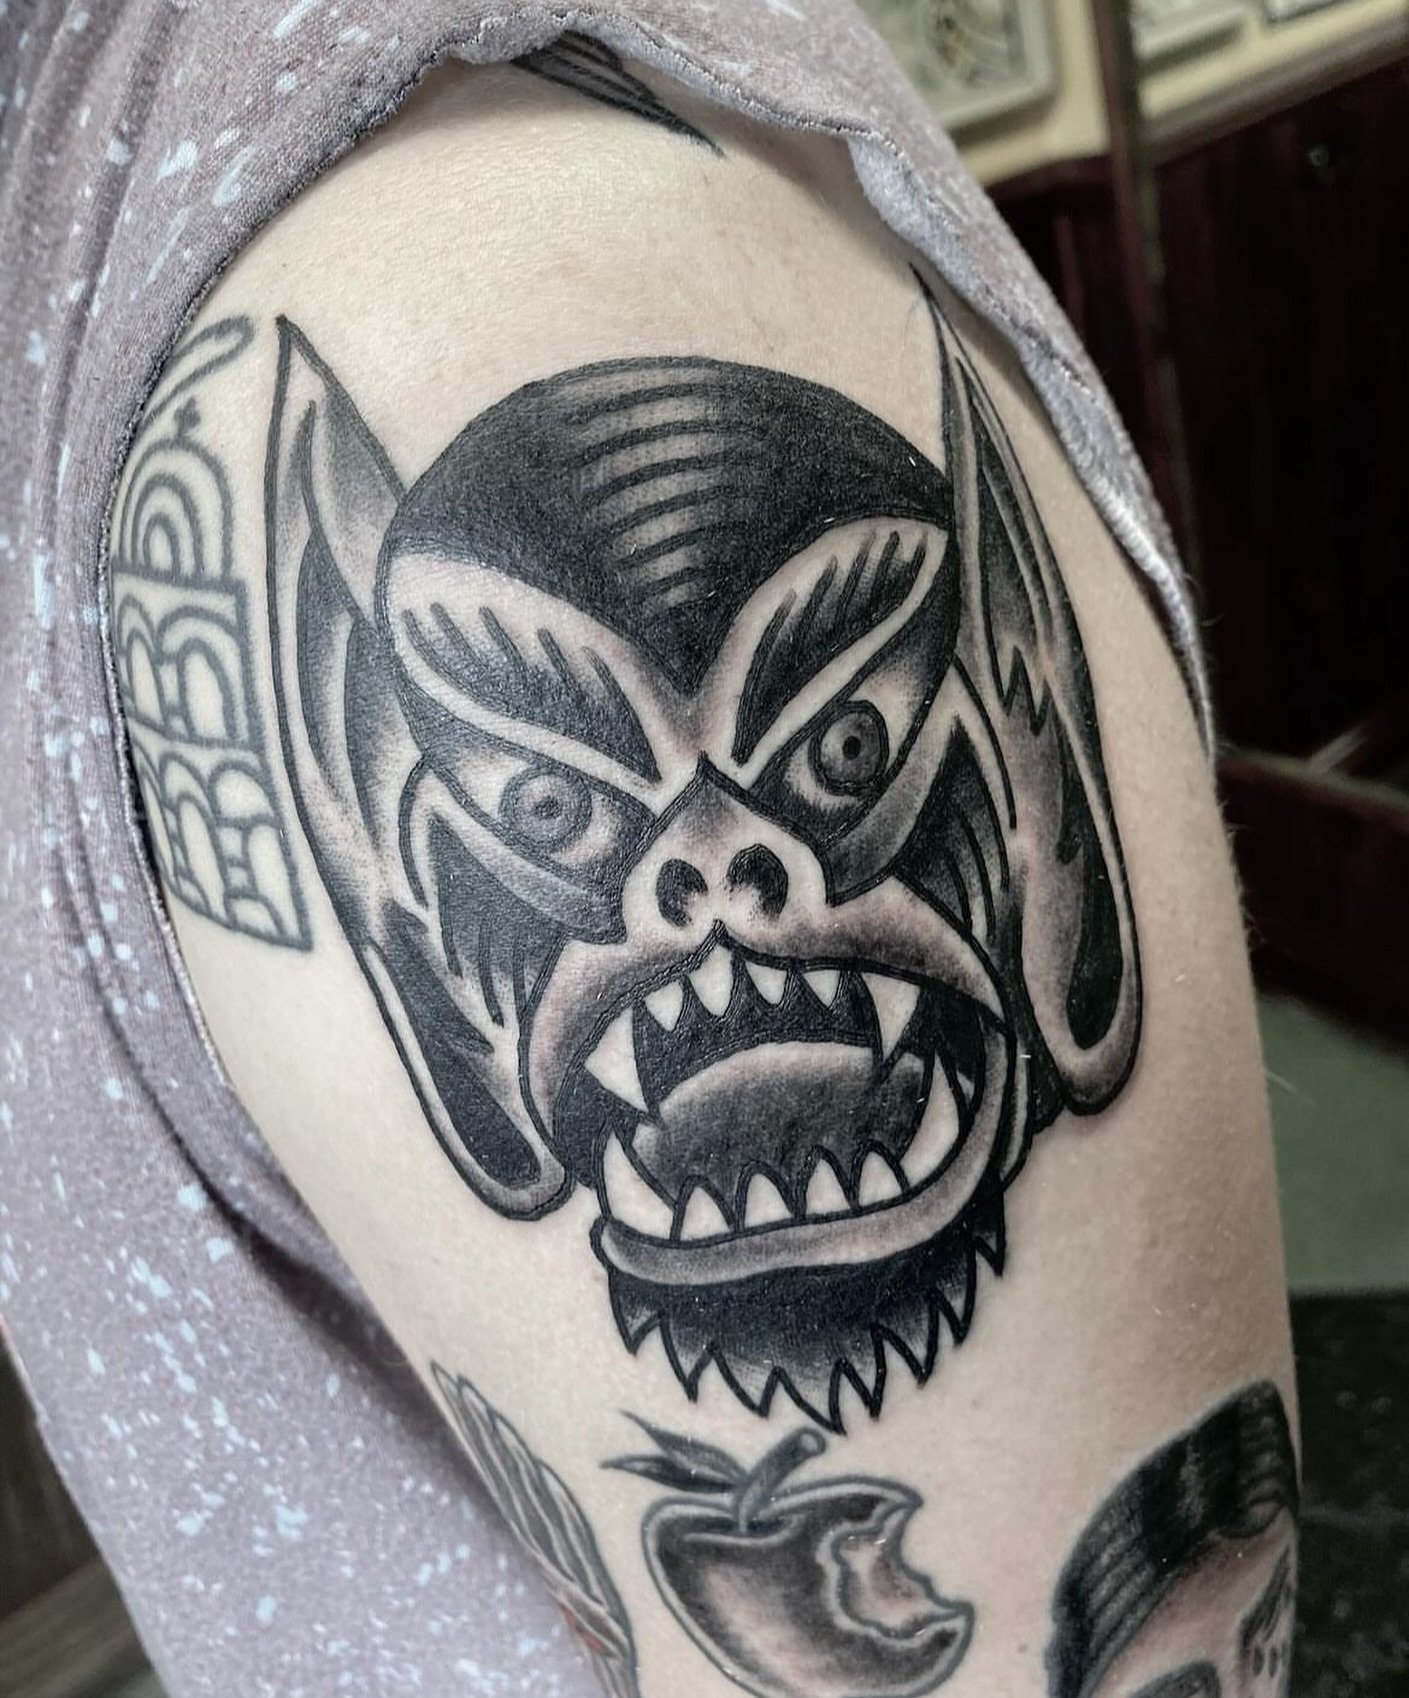 Bat boy is on the loose thanks to @tylerx_tbobs! If you&rsquo;re ready for a tabloid ready tattoo, fly on by the shop or email him at txbrowntattoos@gmail.com to set something up.